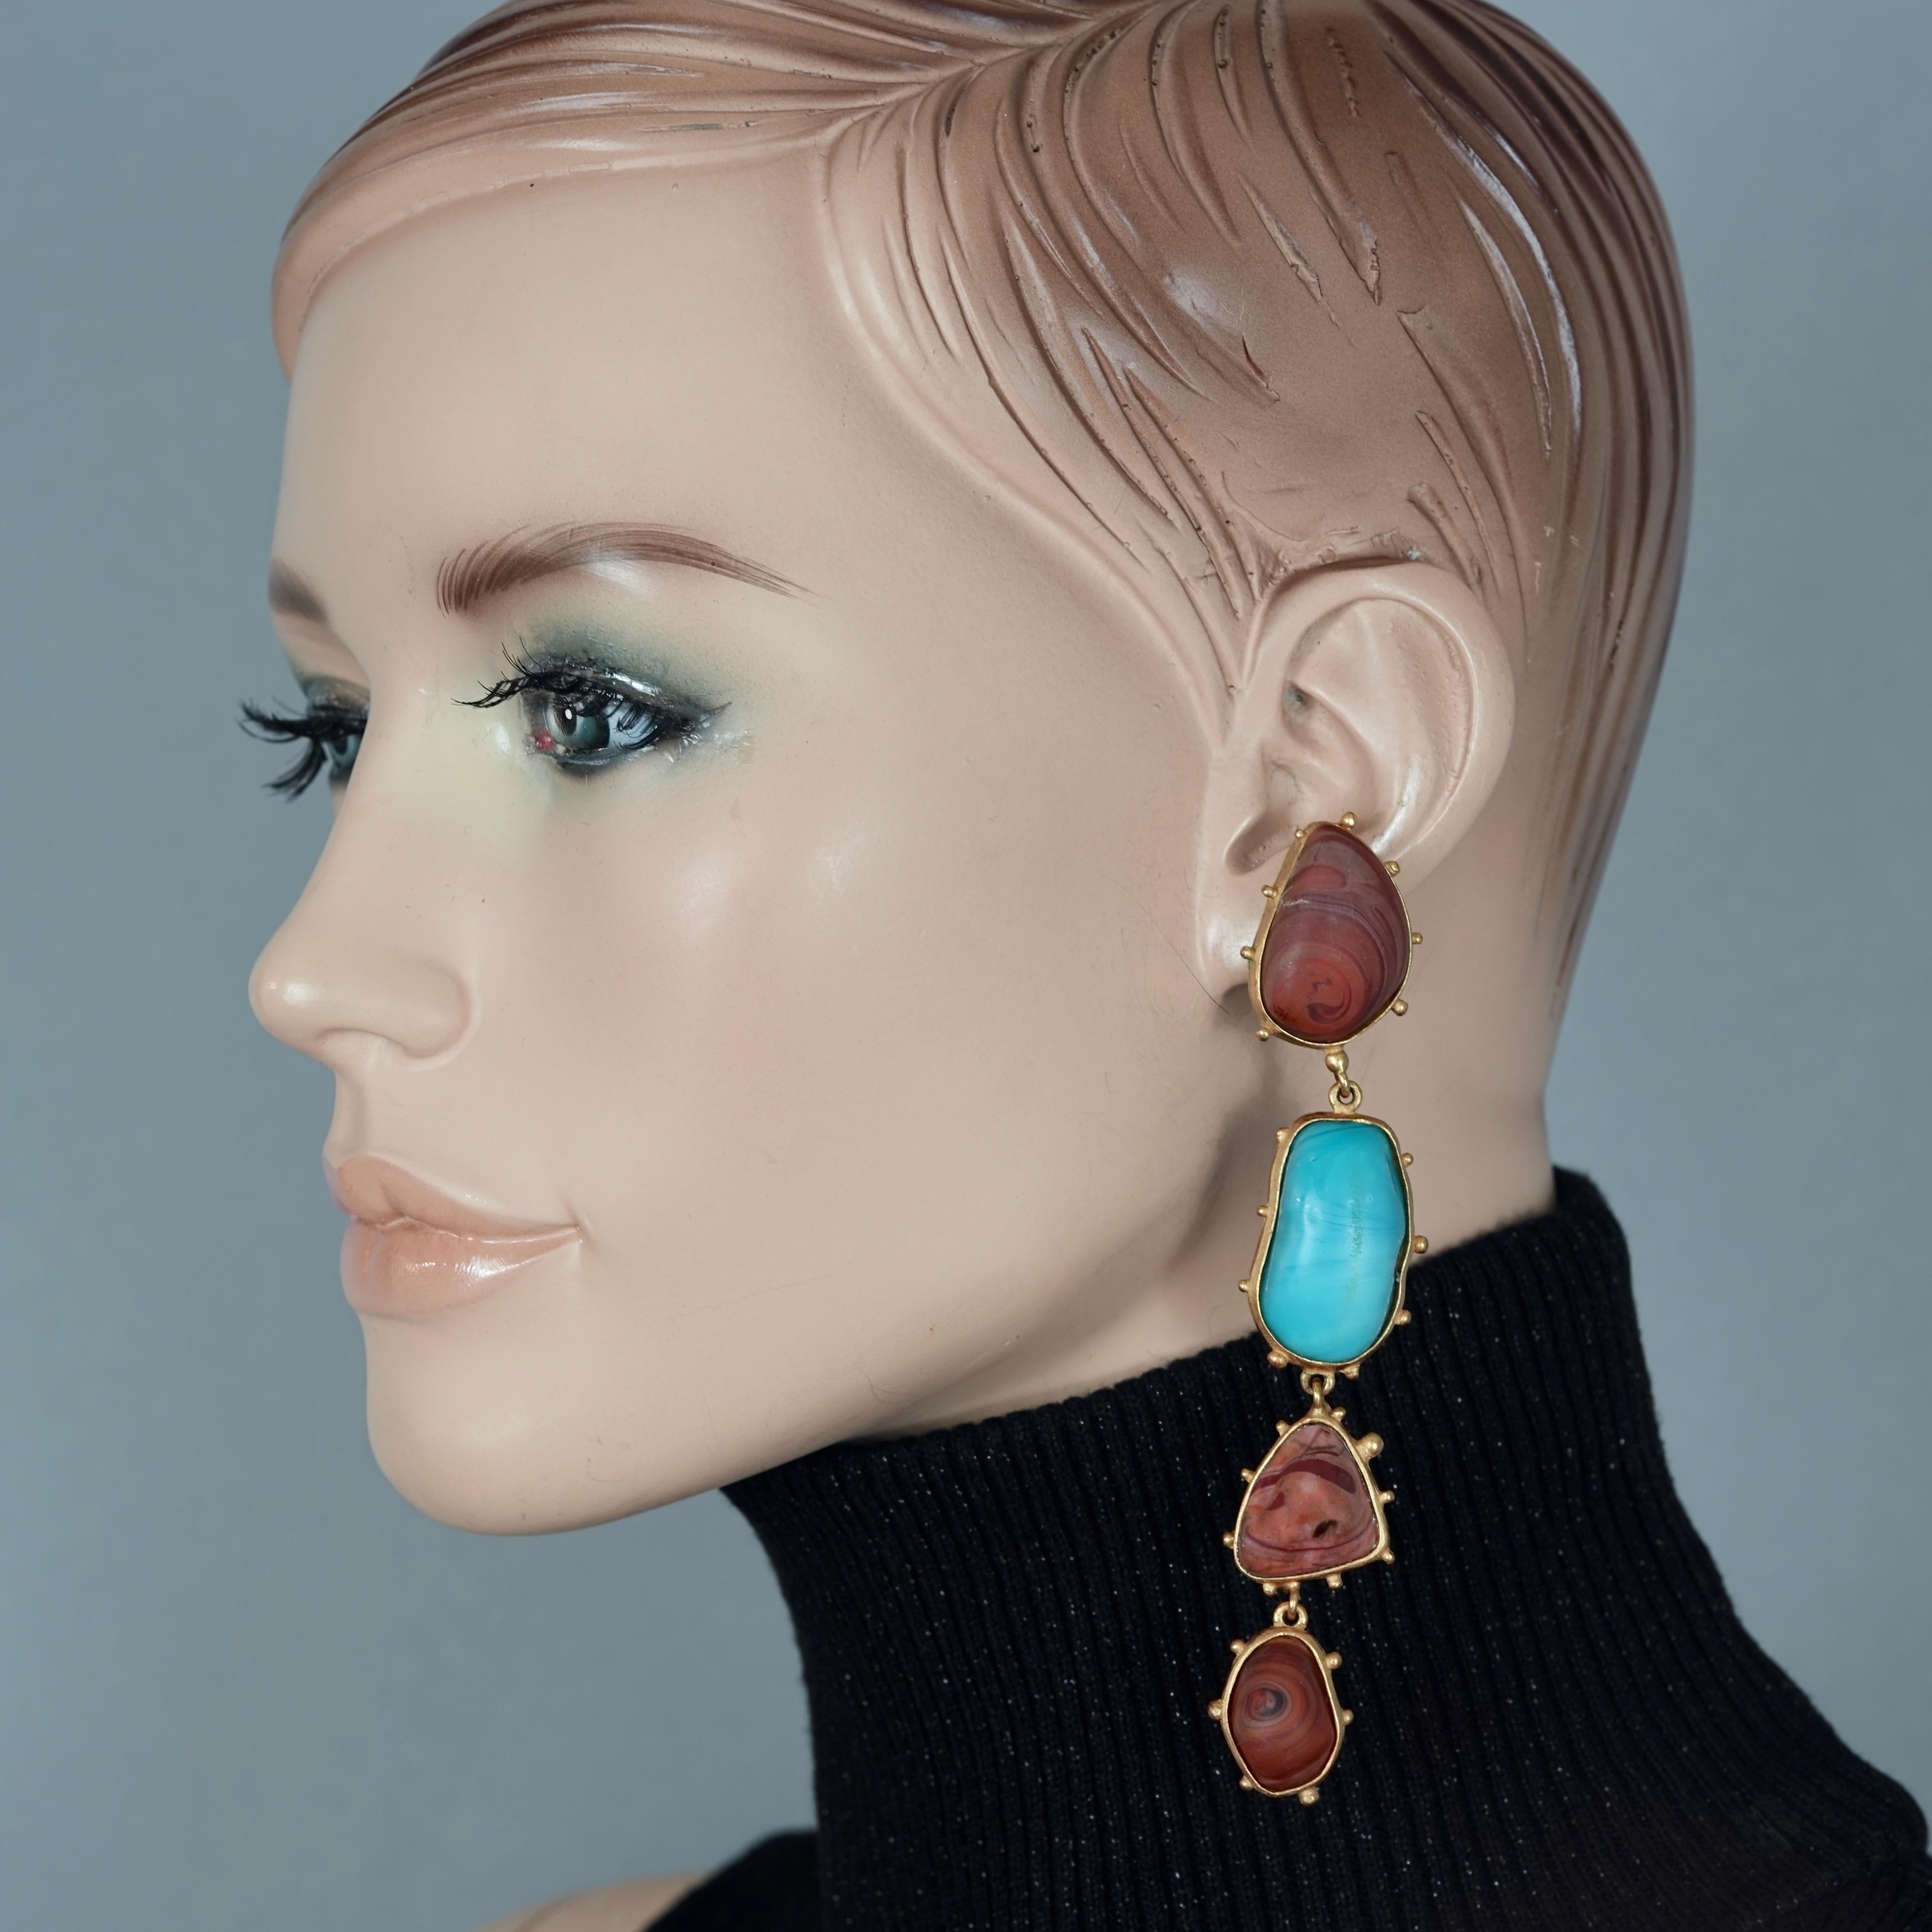 Vintage CHRISTIAN LACROIX Marble Turquoise Brown Dangling Earrings

Measurements:
Height: 4.56 inches (11.6 cm)
Width: 0.86 inch (2.2 cm)
Weight per Earring: 32 grams

Features:
- 100% Authentic Christian Lacroix.
- Marbled turquoise and brown